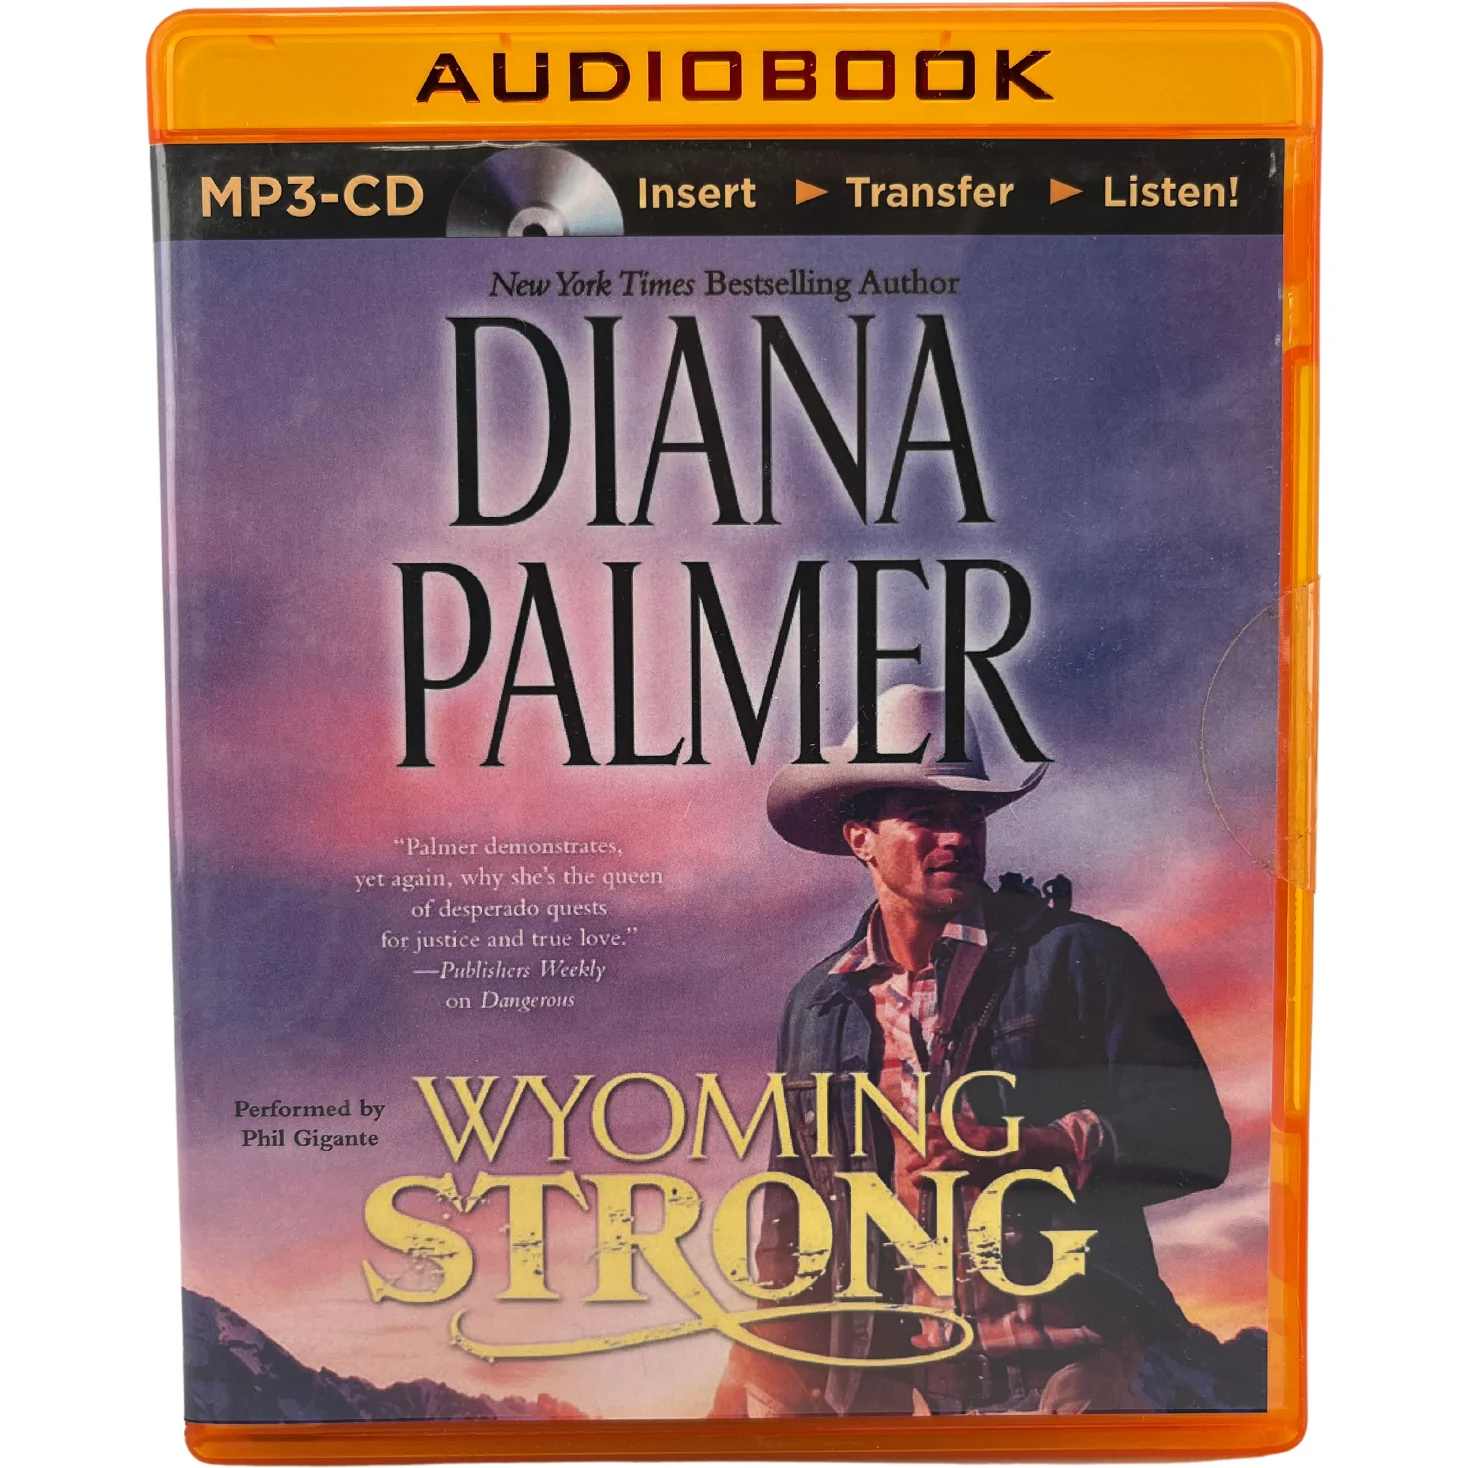 Audiobook "Wyoming Strong" / Author Diana Palmer / MP3-CD